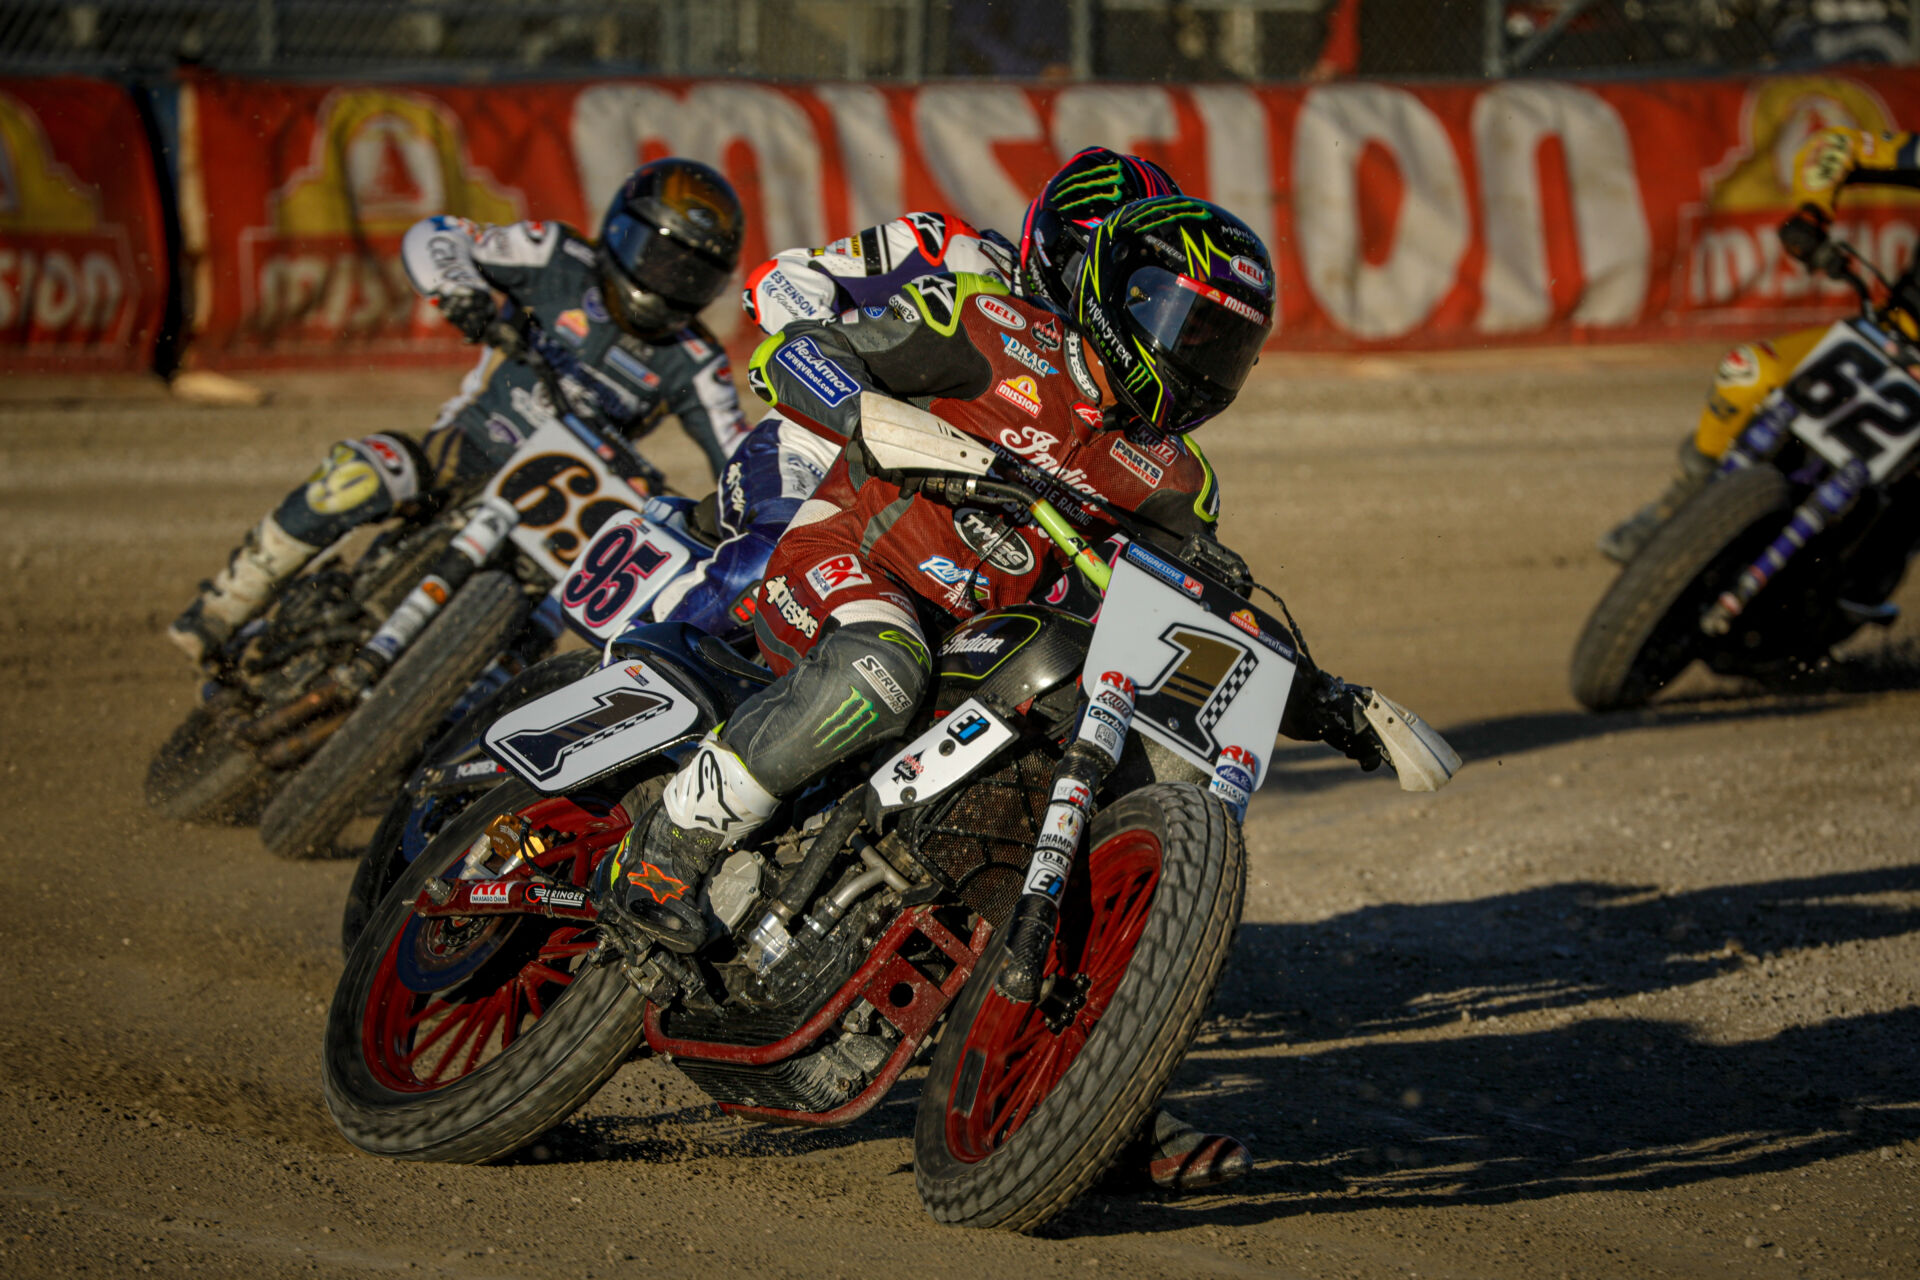 2023 American Flat Track (AFT) Mission SuperTwins Champion Jared Mees. Photo by Scott Hunter, courtesy AFT.